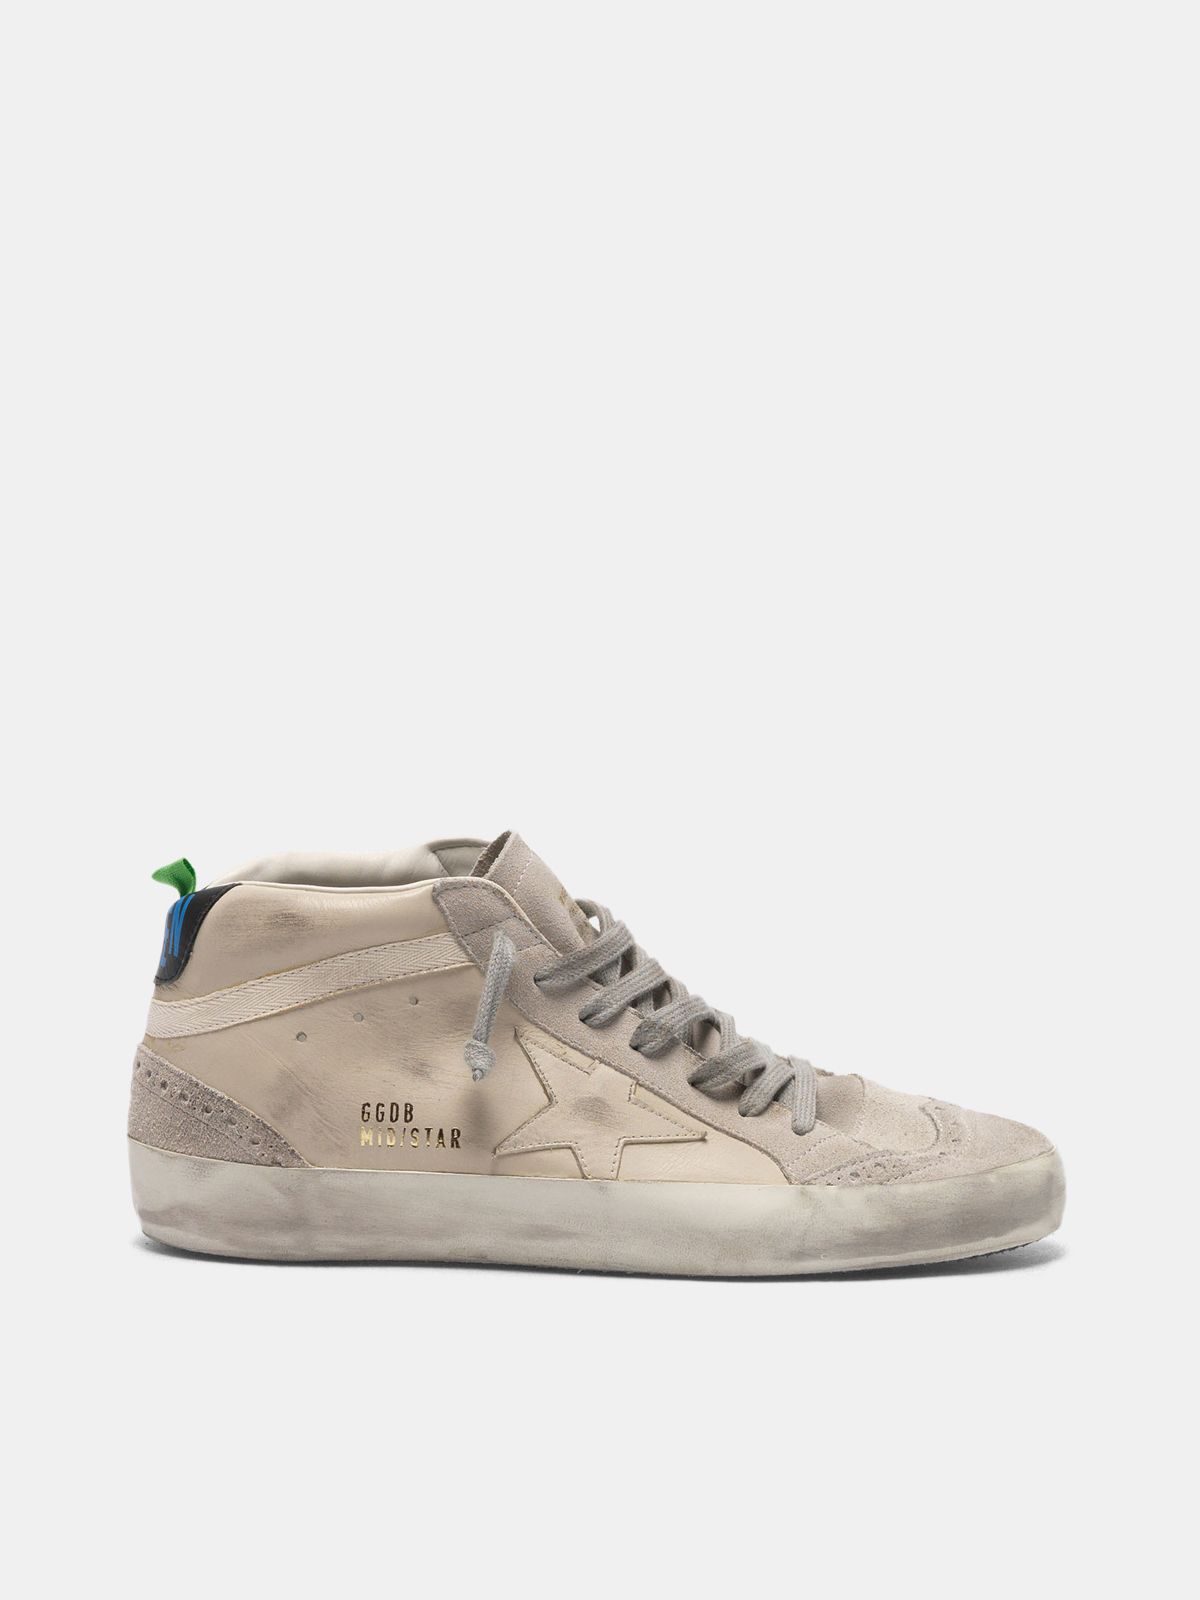 Golden Goose Sneakers Uomo Mid Star sneakers in smooth leather and suede